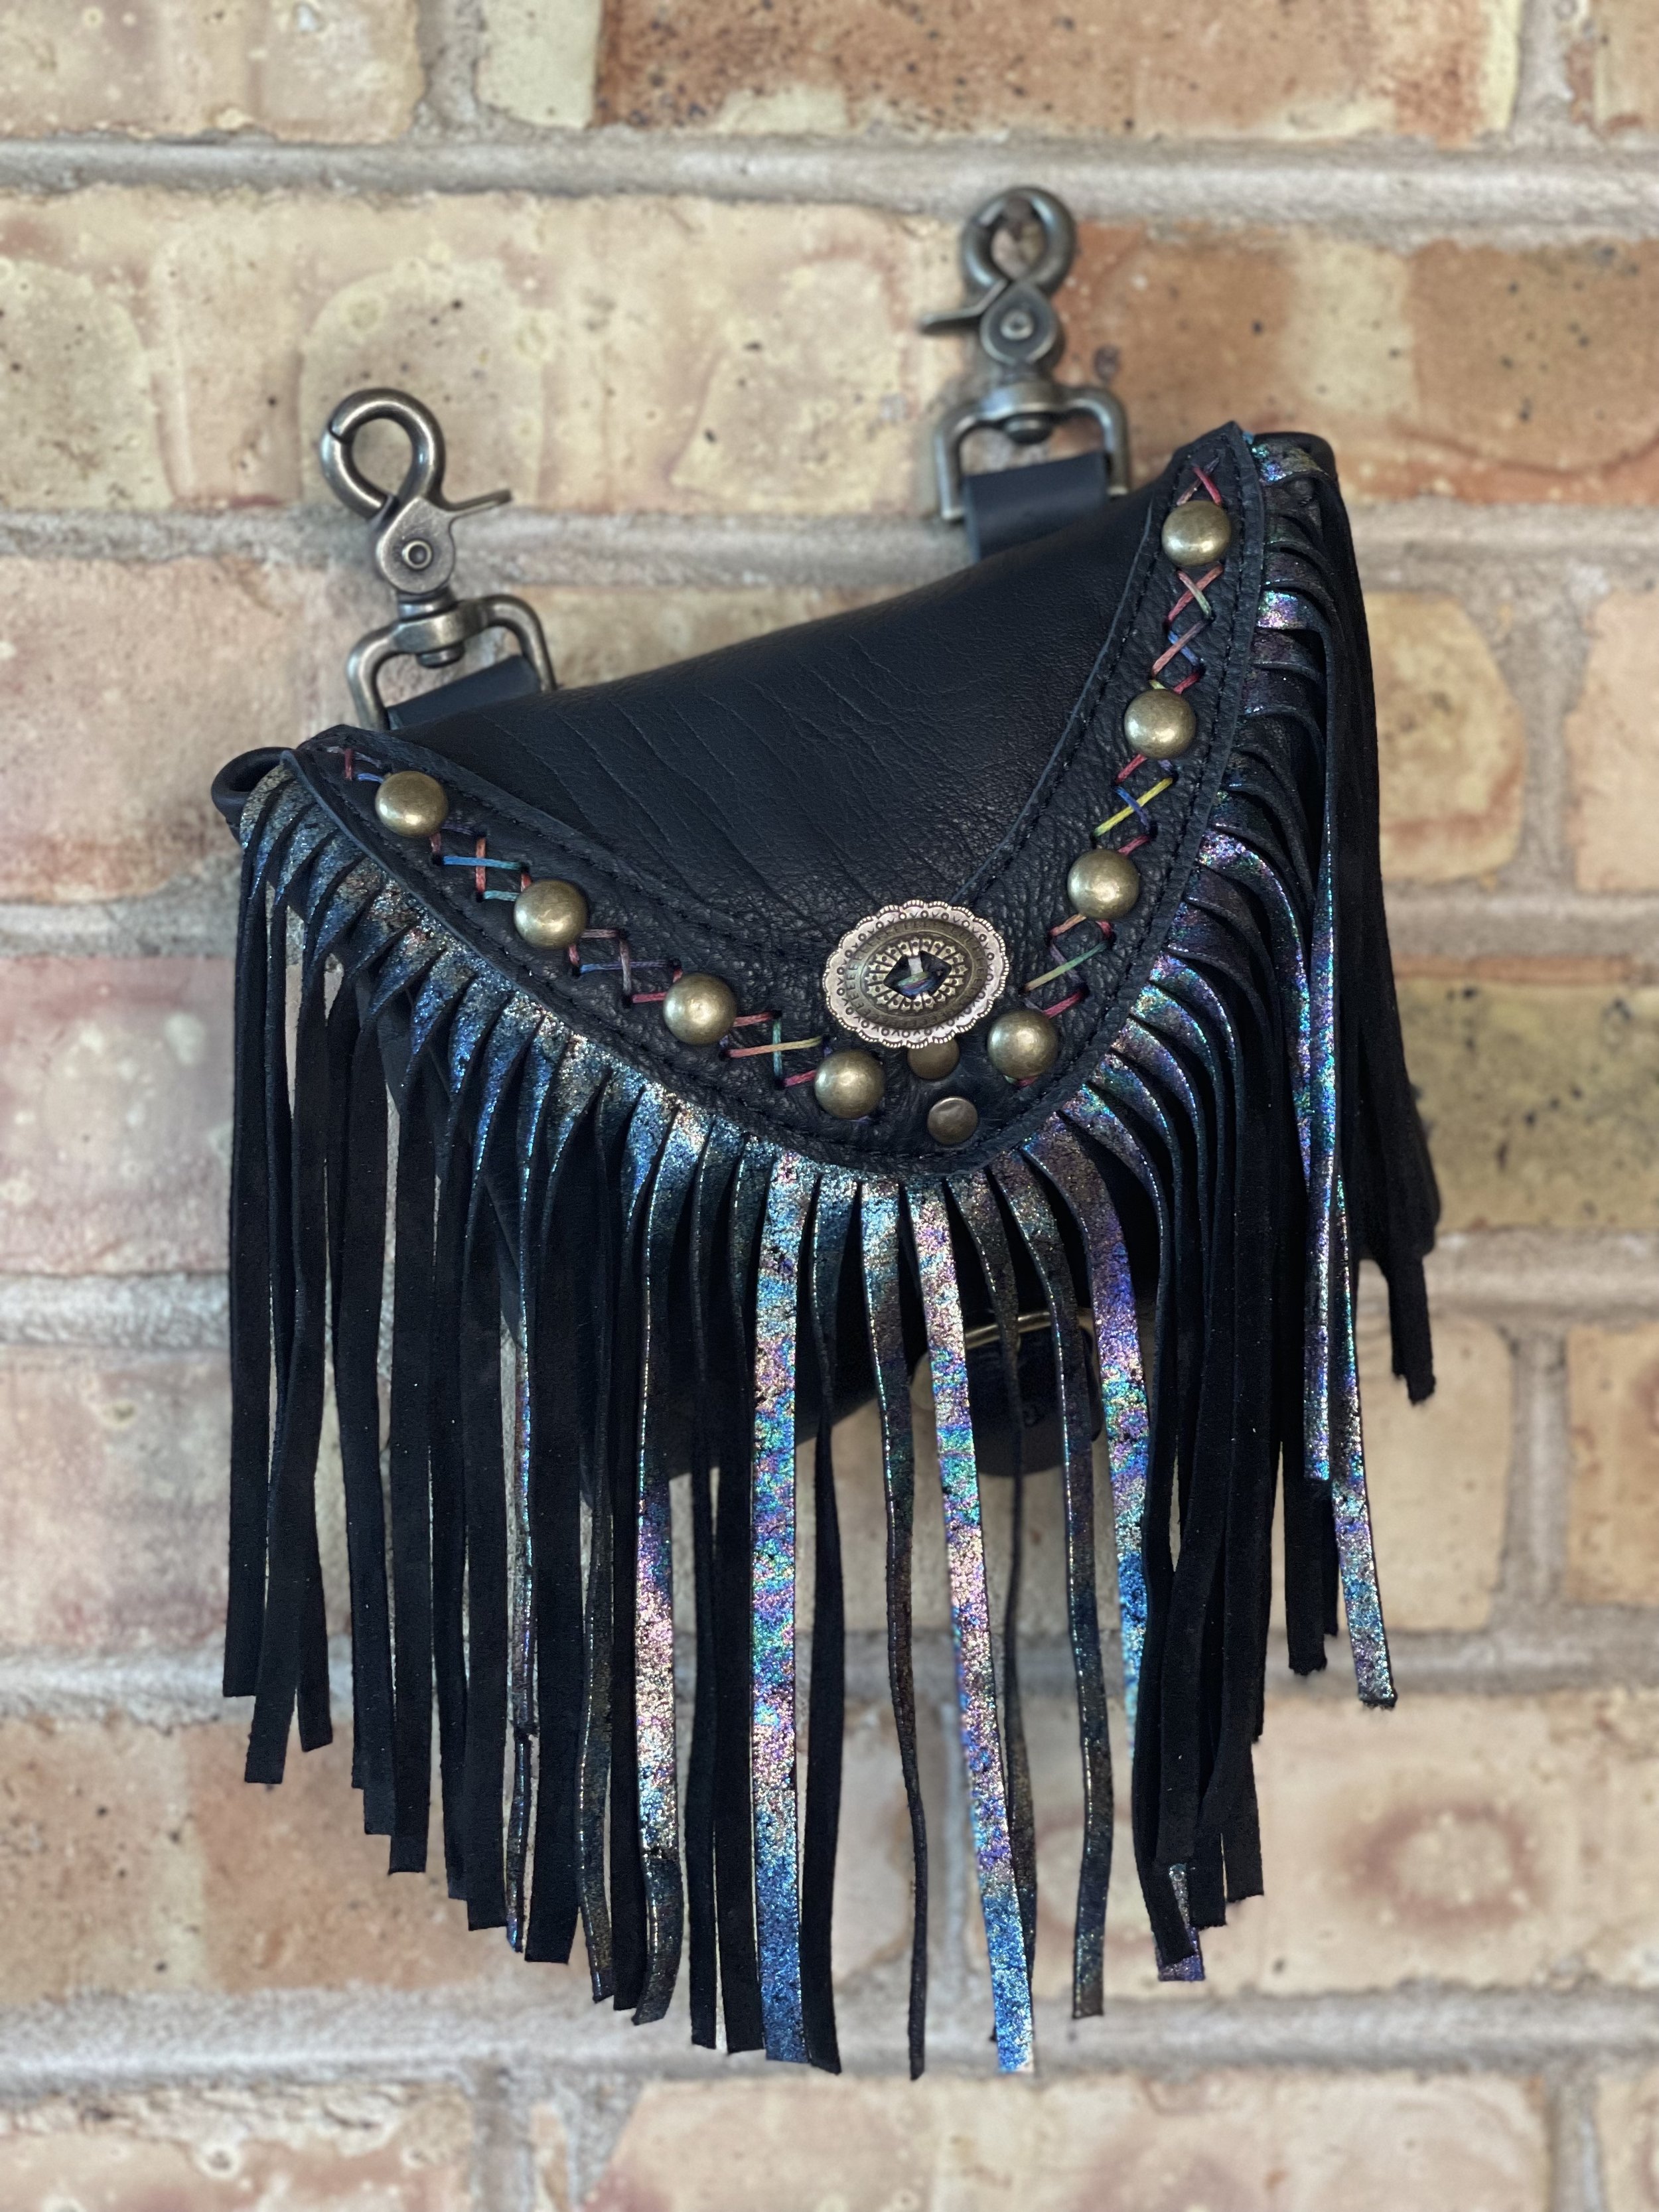 On The Road Hip Bag in Black Bison, Antique Marble Fringe, Rainbow Criss Cross Handstitching, Studs, and a Concho